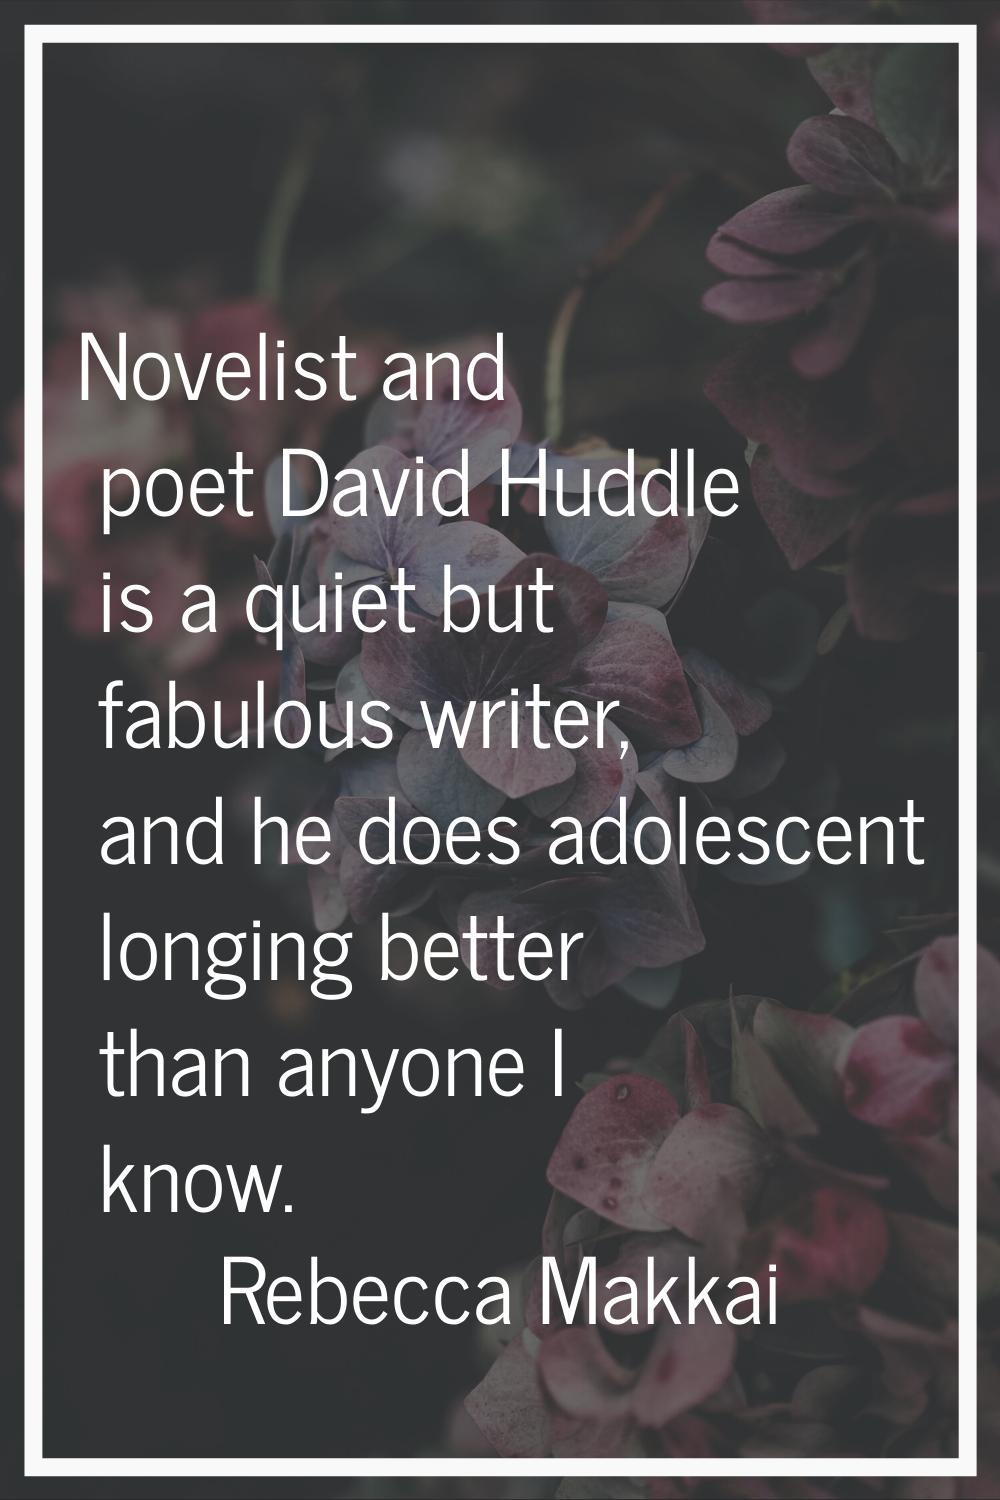 Novelist and poet David Huddle is a quiet but fabulous writer, and he does adolescent longing bette